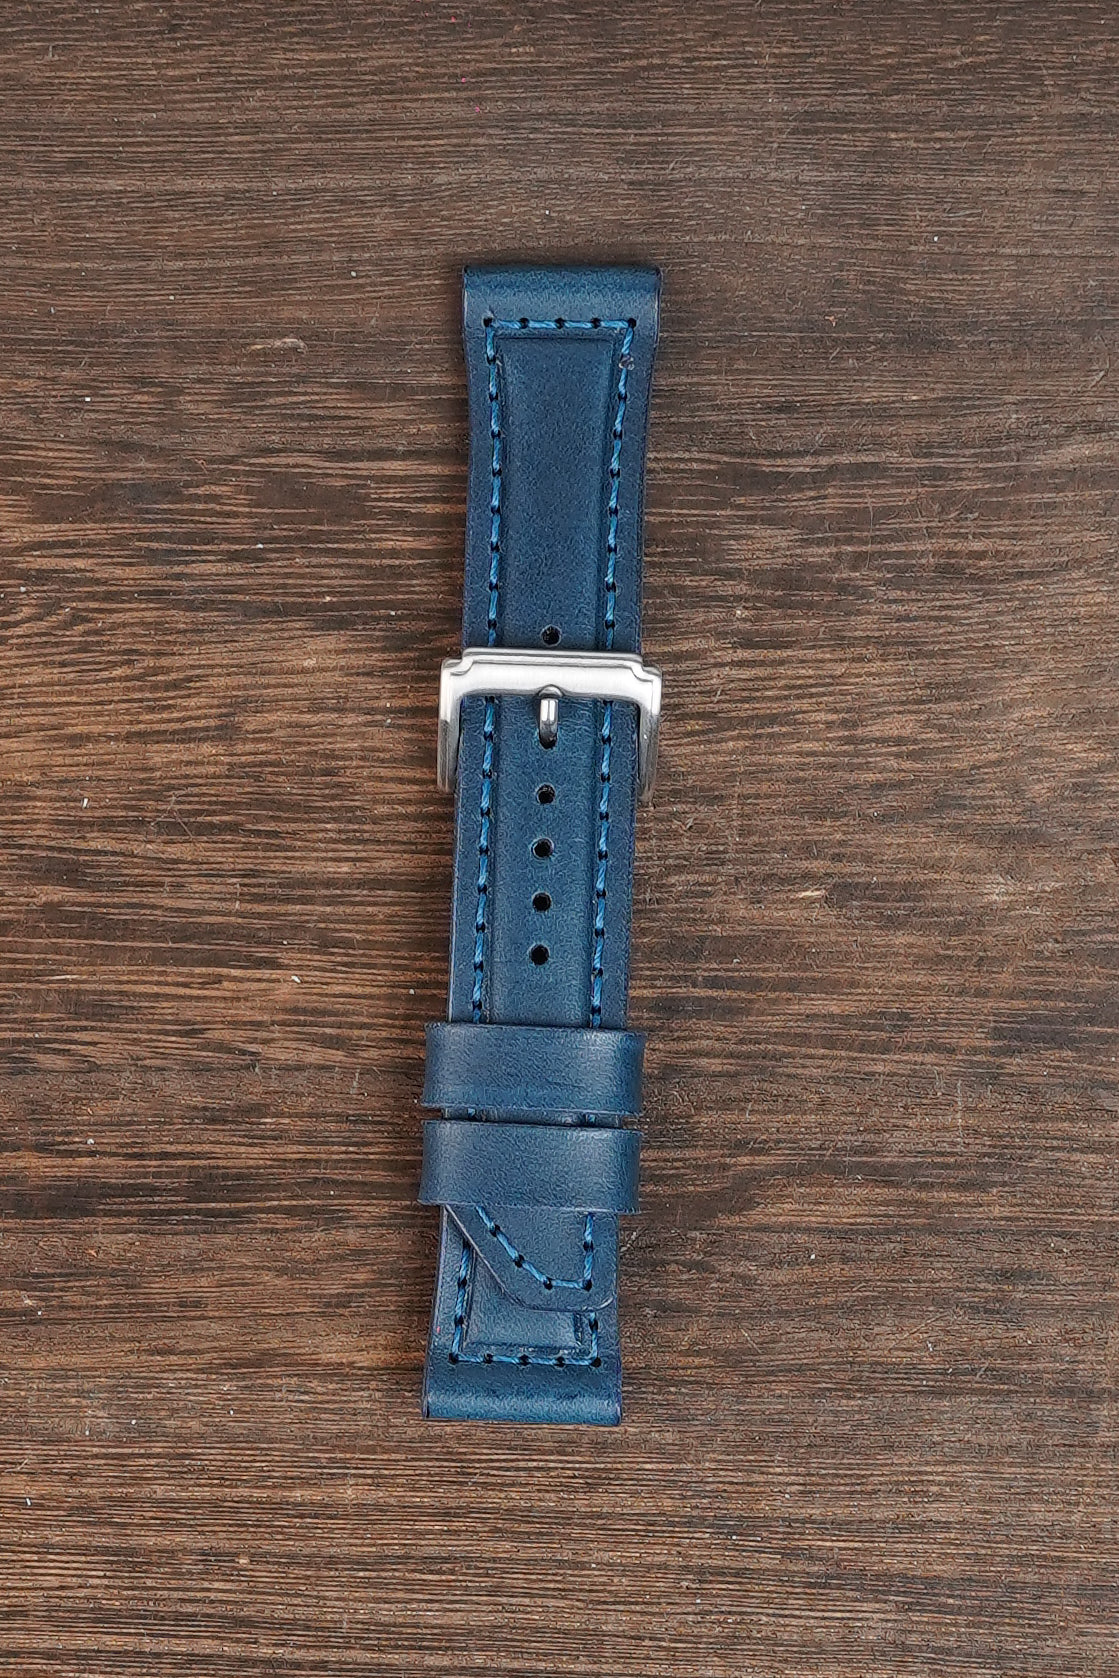 Single Watch Accessory - The Leather Strap